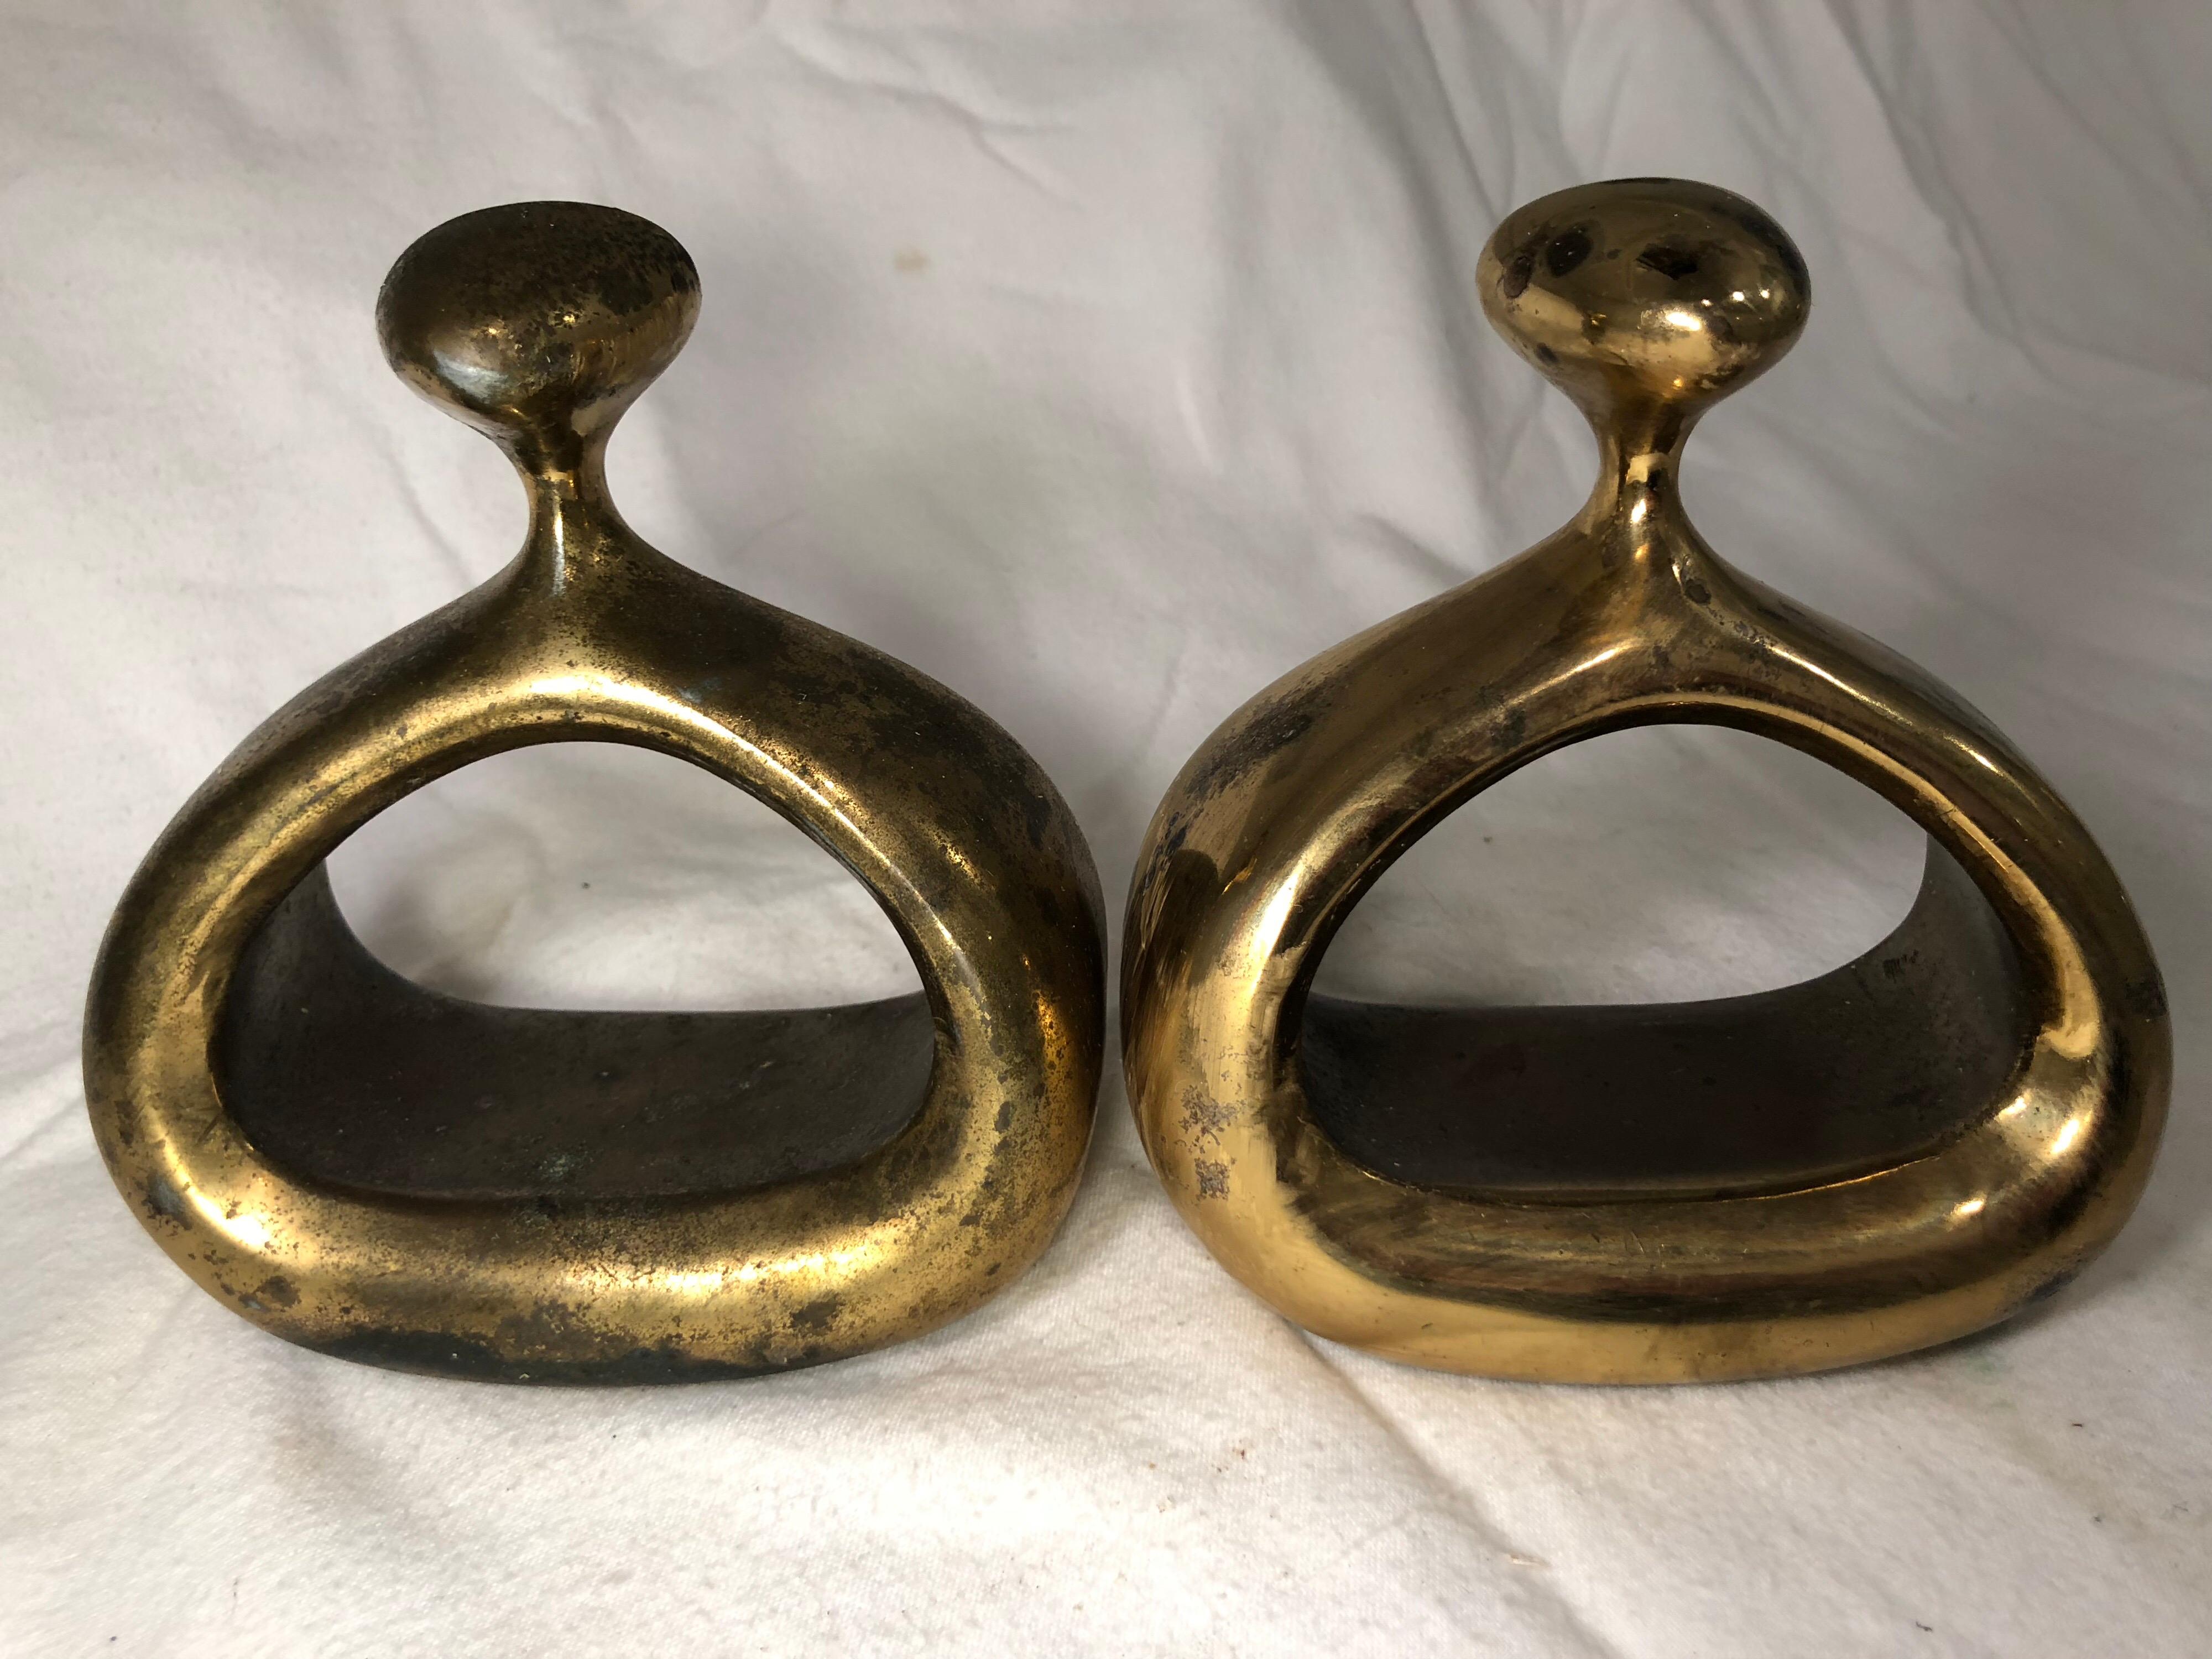 Pair of Ben Seibel Bookends for Jenfred-Ware . Amoeba like shape to these Classic midcentury bookends. These book weights are rather light. Not super heavy like other Ben Seibel ones. Unable to polish clean, 